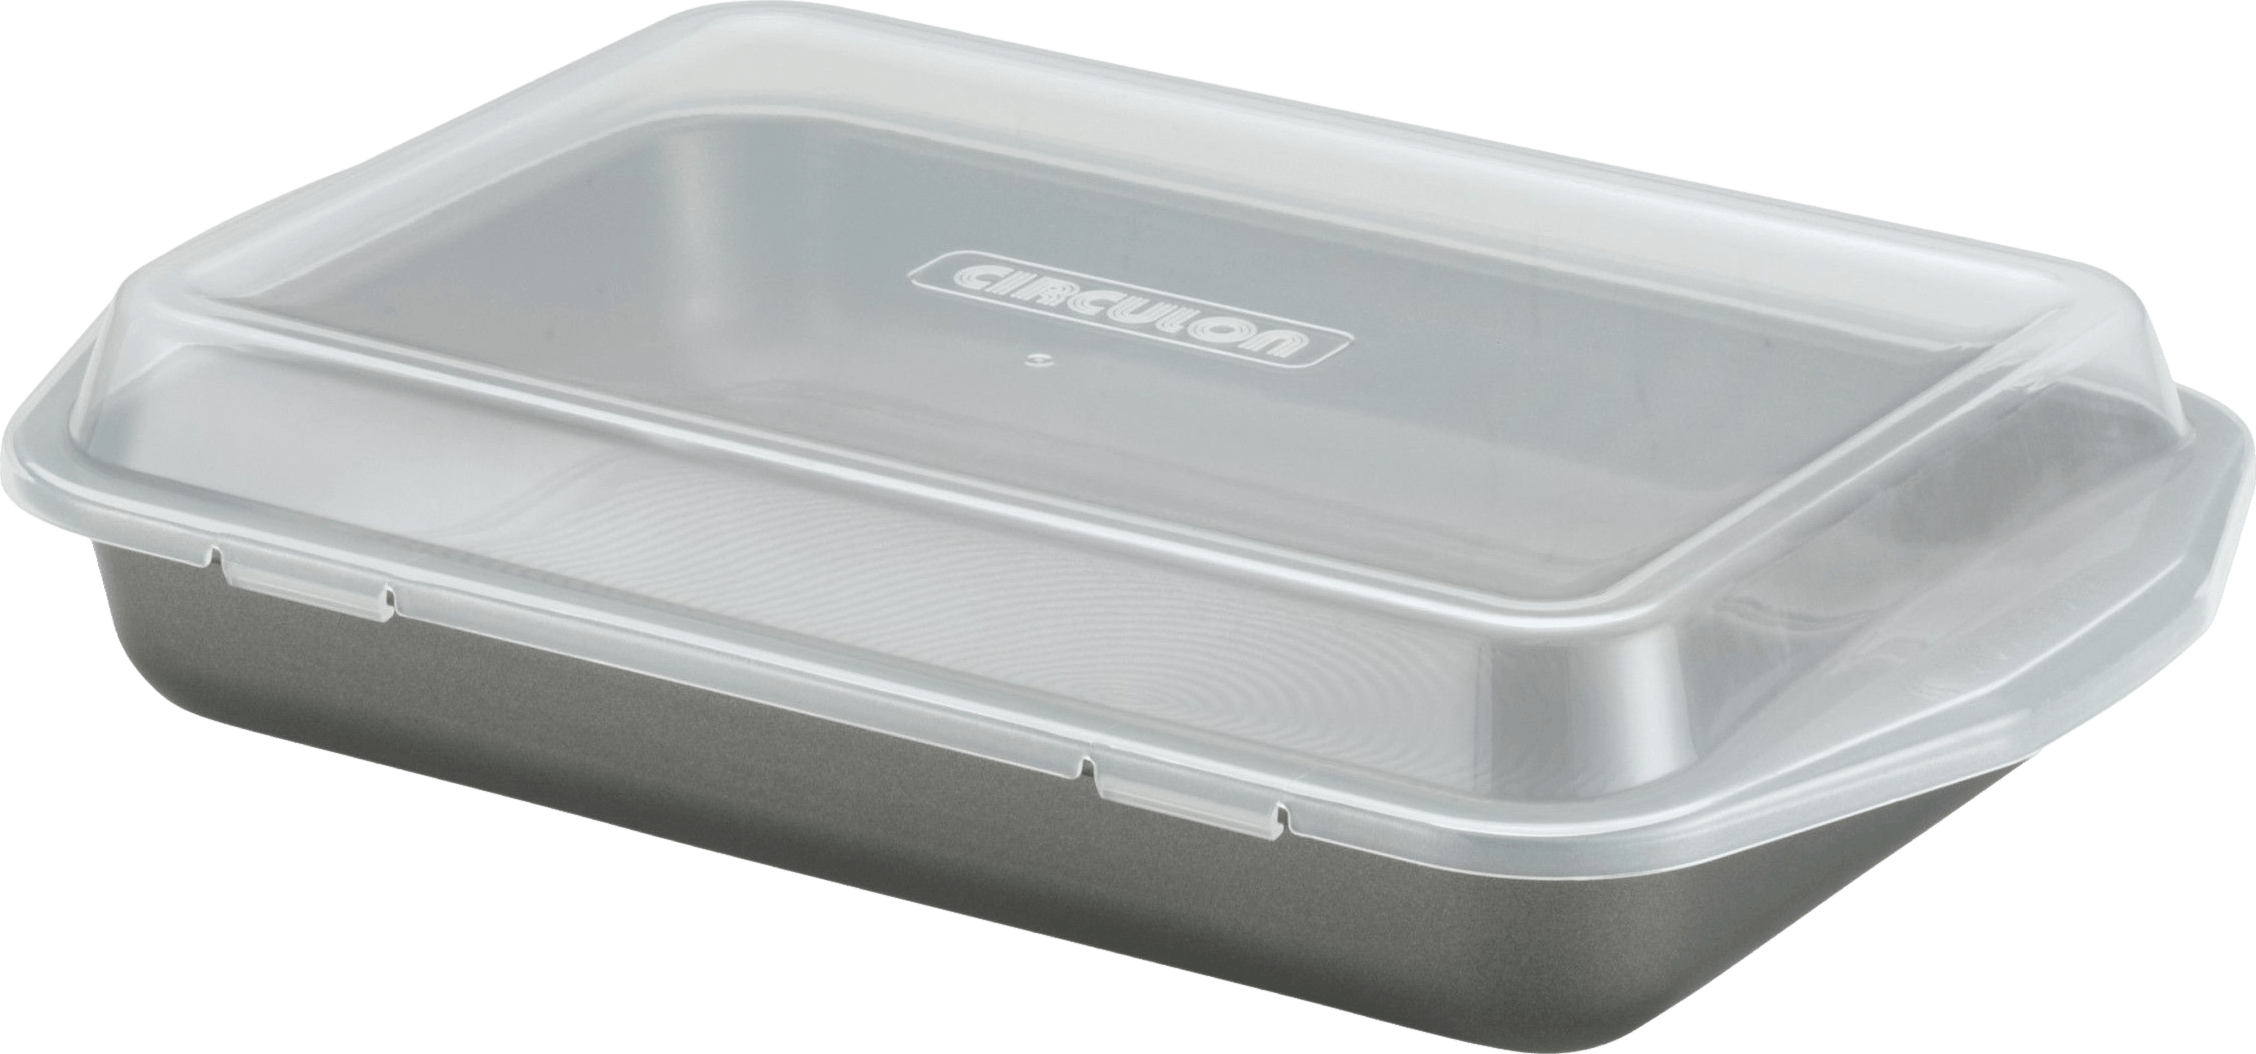 The Best 13x9 Baking Dishes & Pans